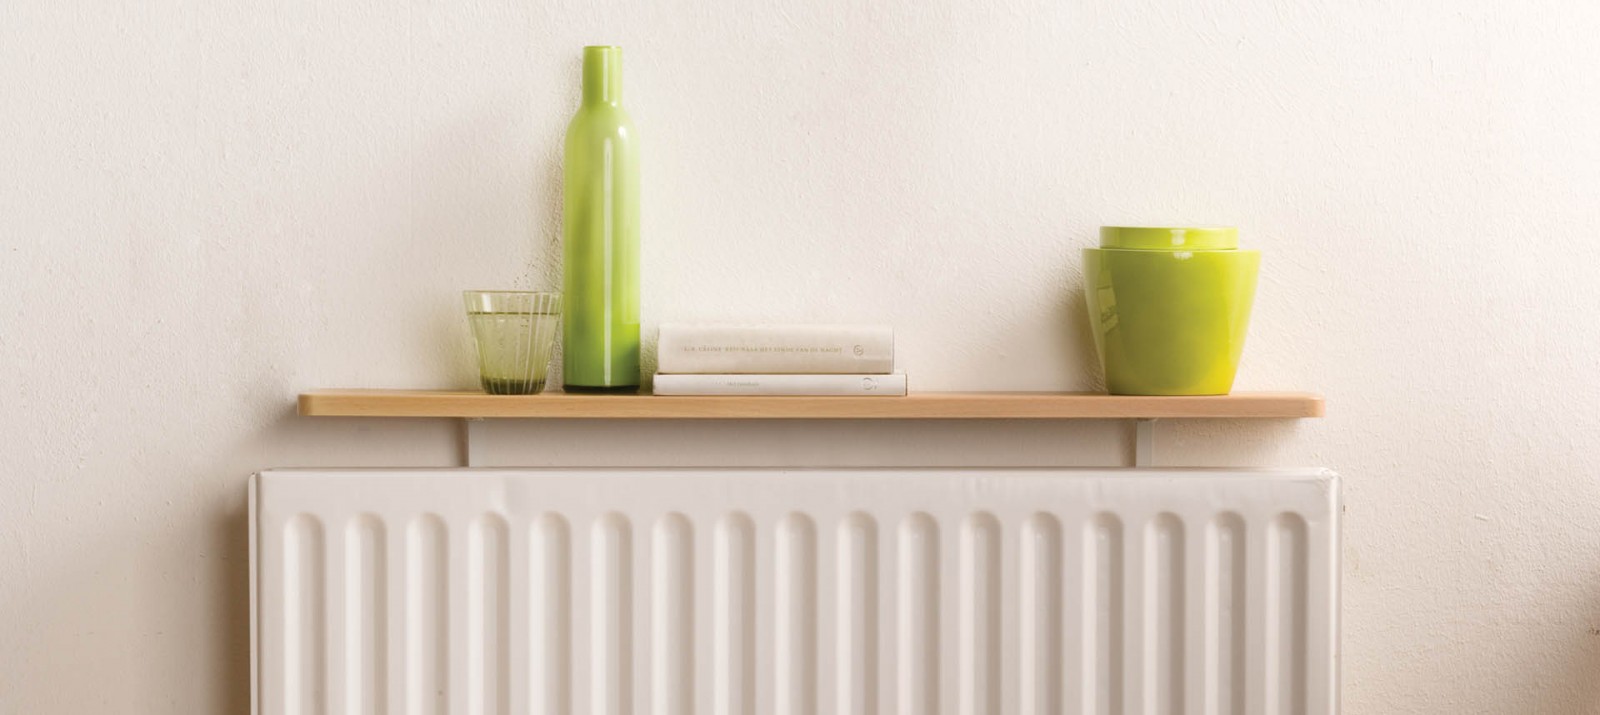 A drinking glass, decorative vase, books, and pots are stored on top of a radiator shelf kit from B!Organised.